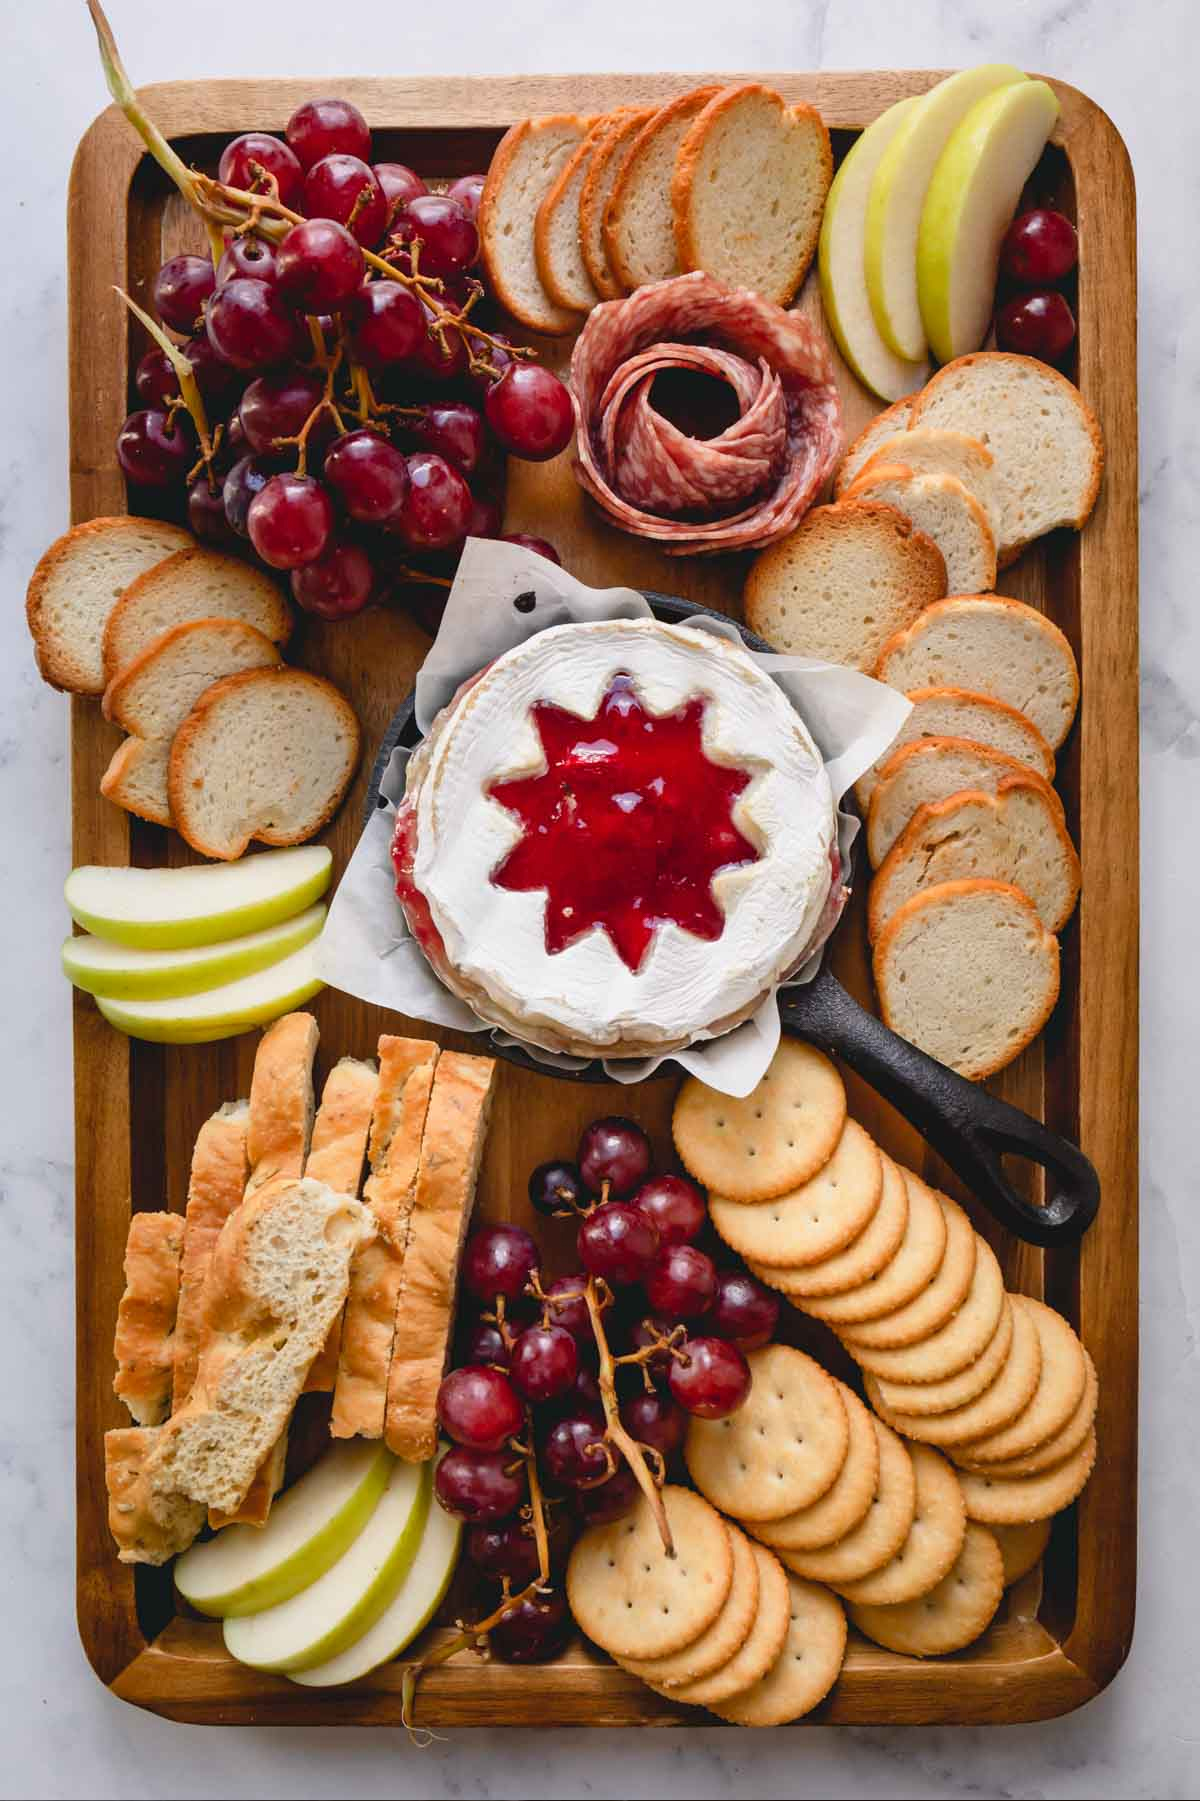 Fruit, bread, meat, grapes, and a brie wheel with jelly are shown on Sweet and Savory By Shinee's board.